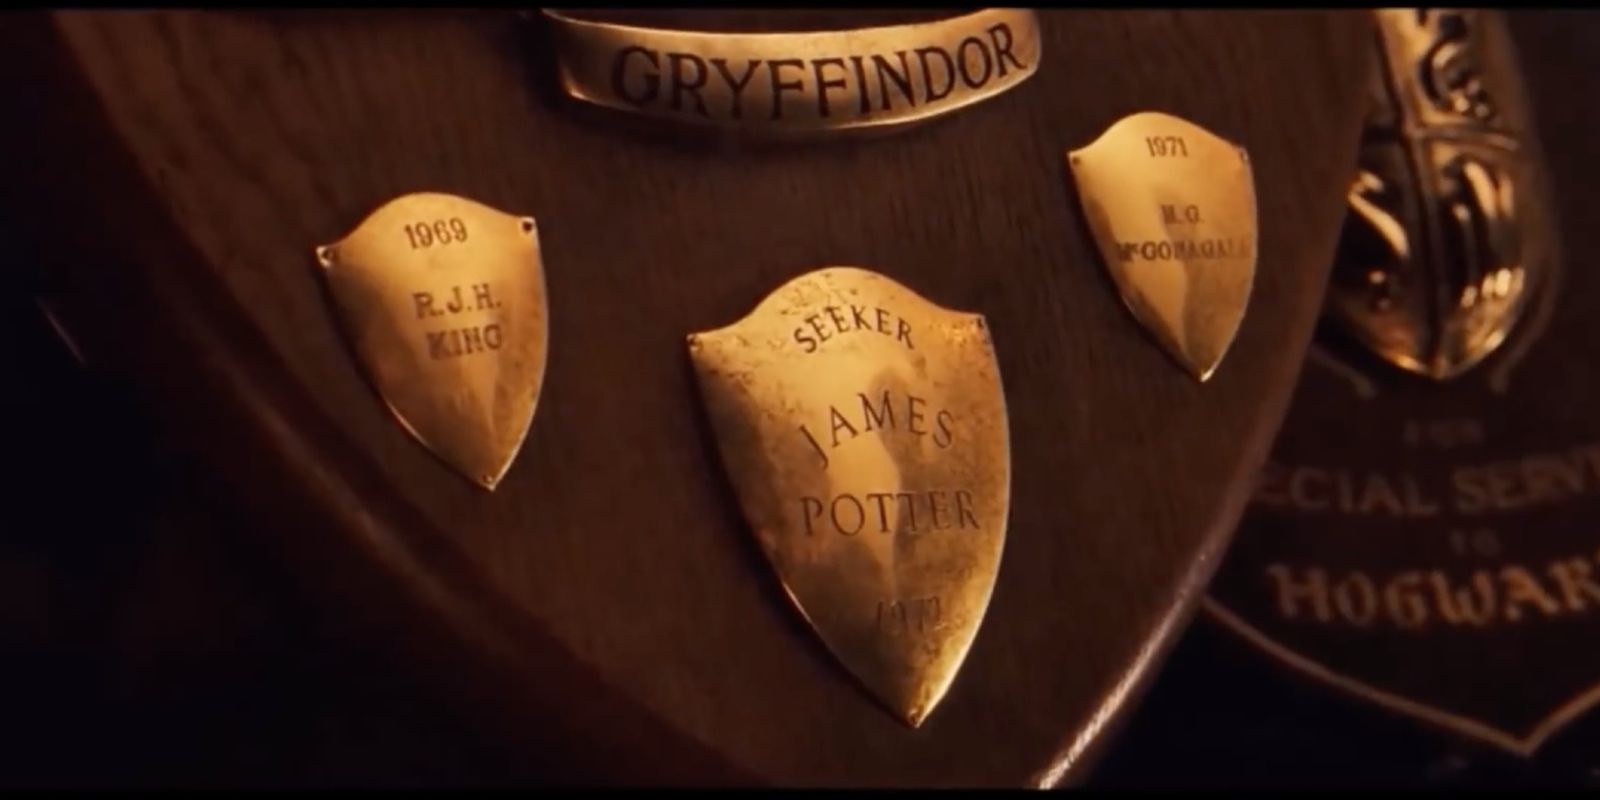 The Gryffindor Quidditch trophy case in Harry Potter and the Sorcerer's Stone.